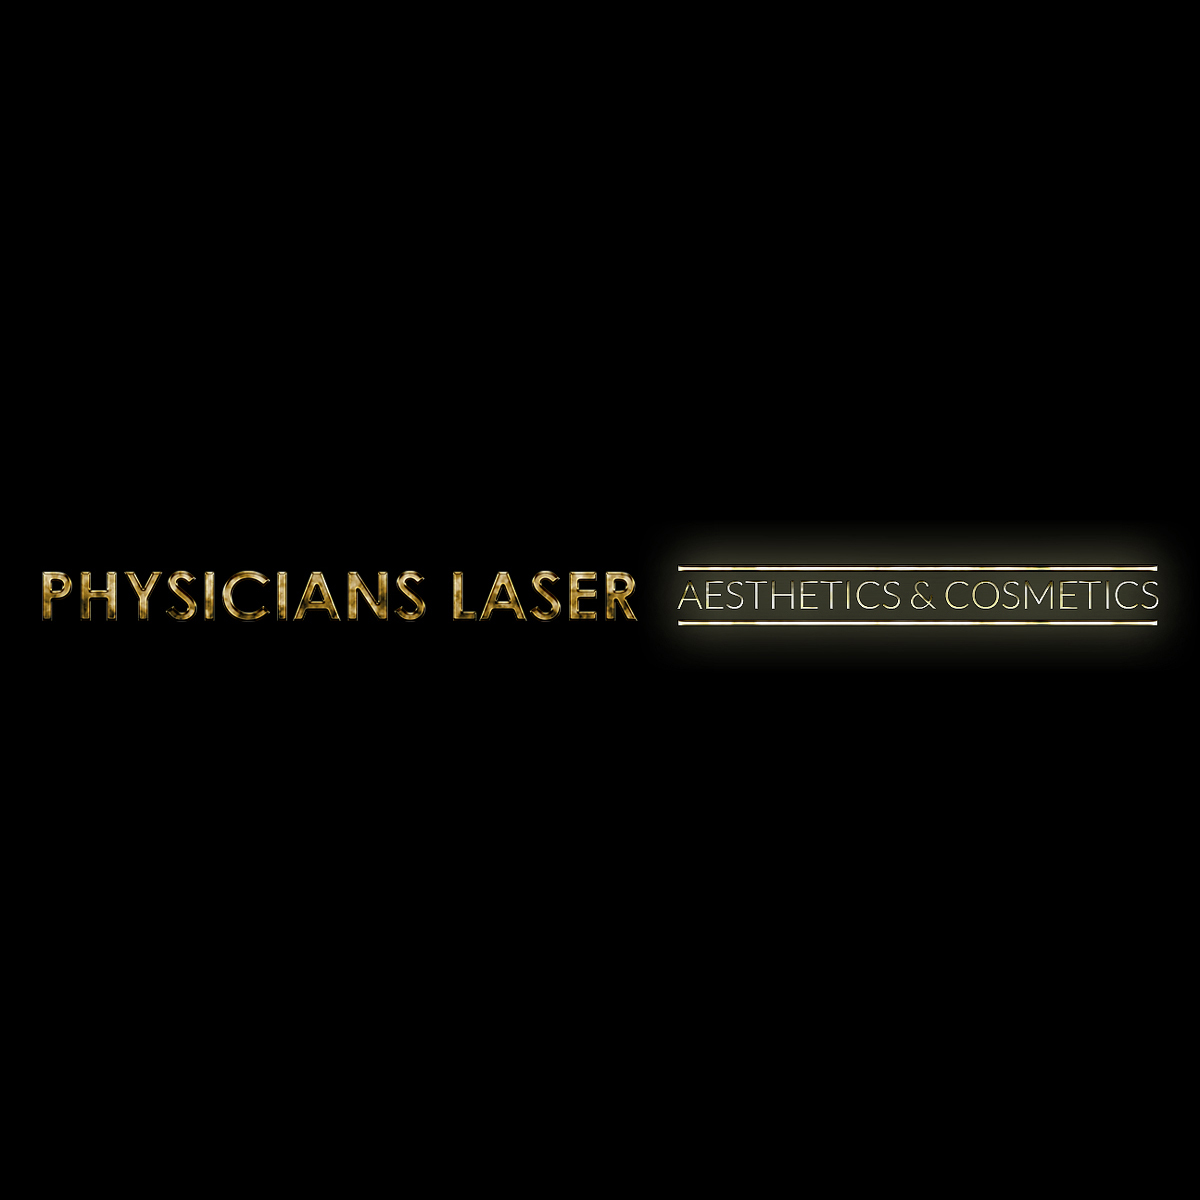 Physicians Laser Aesthetics & Cosmetic